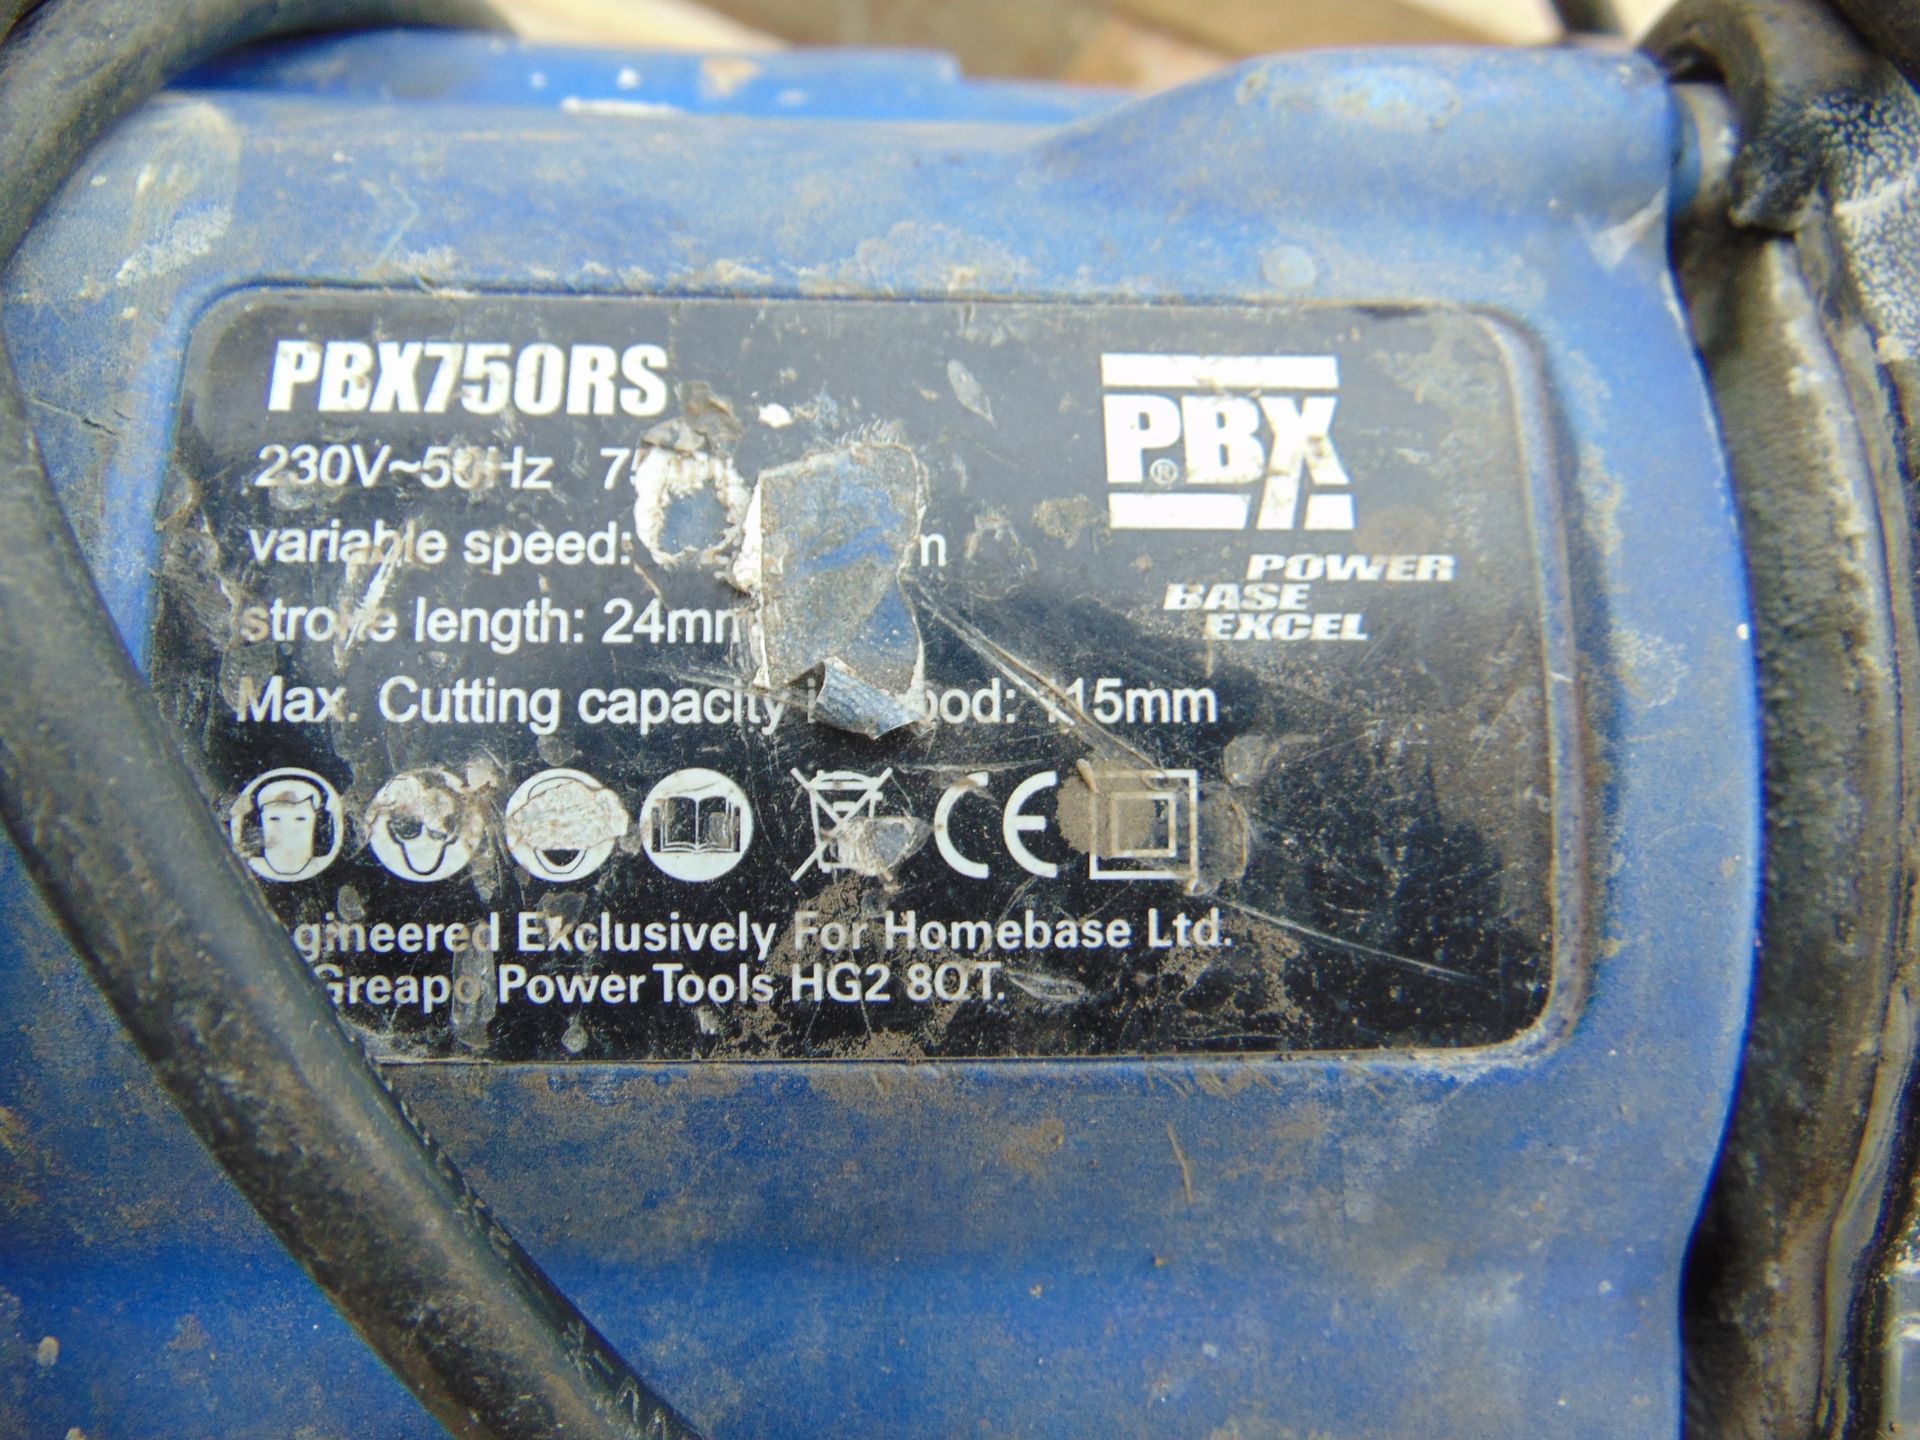 PBX750RS Reciprocating Saw - Image 4 of 4